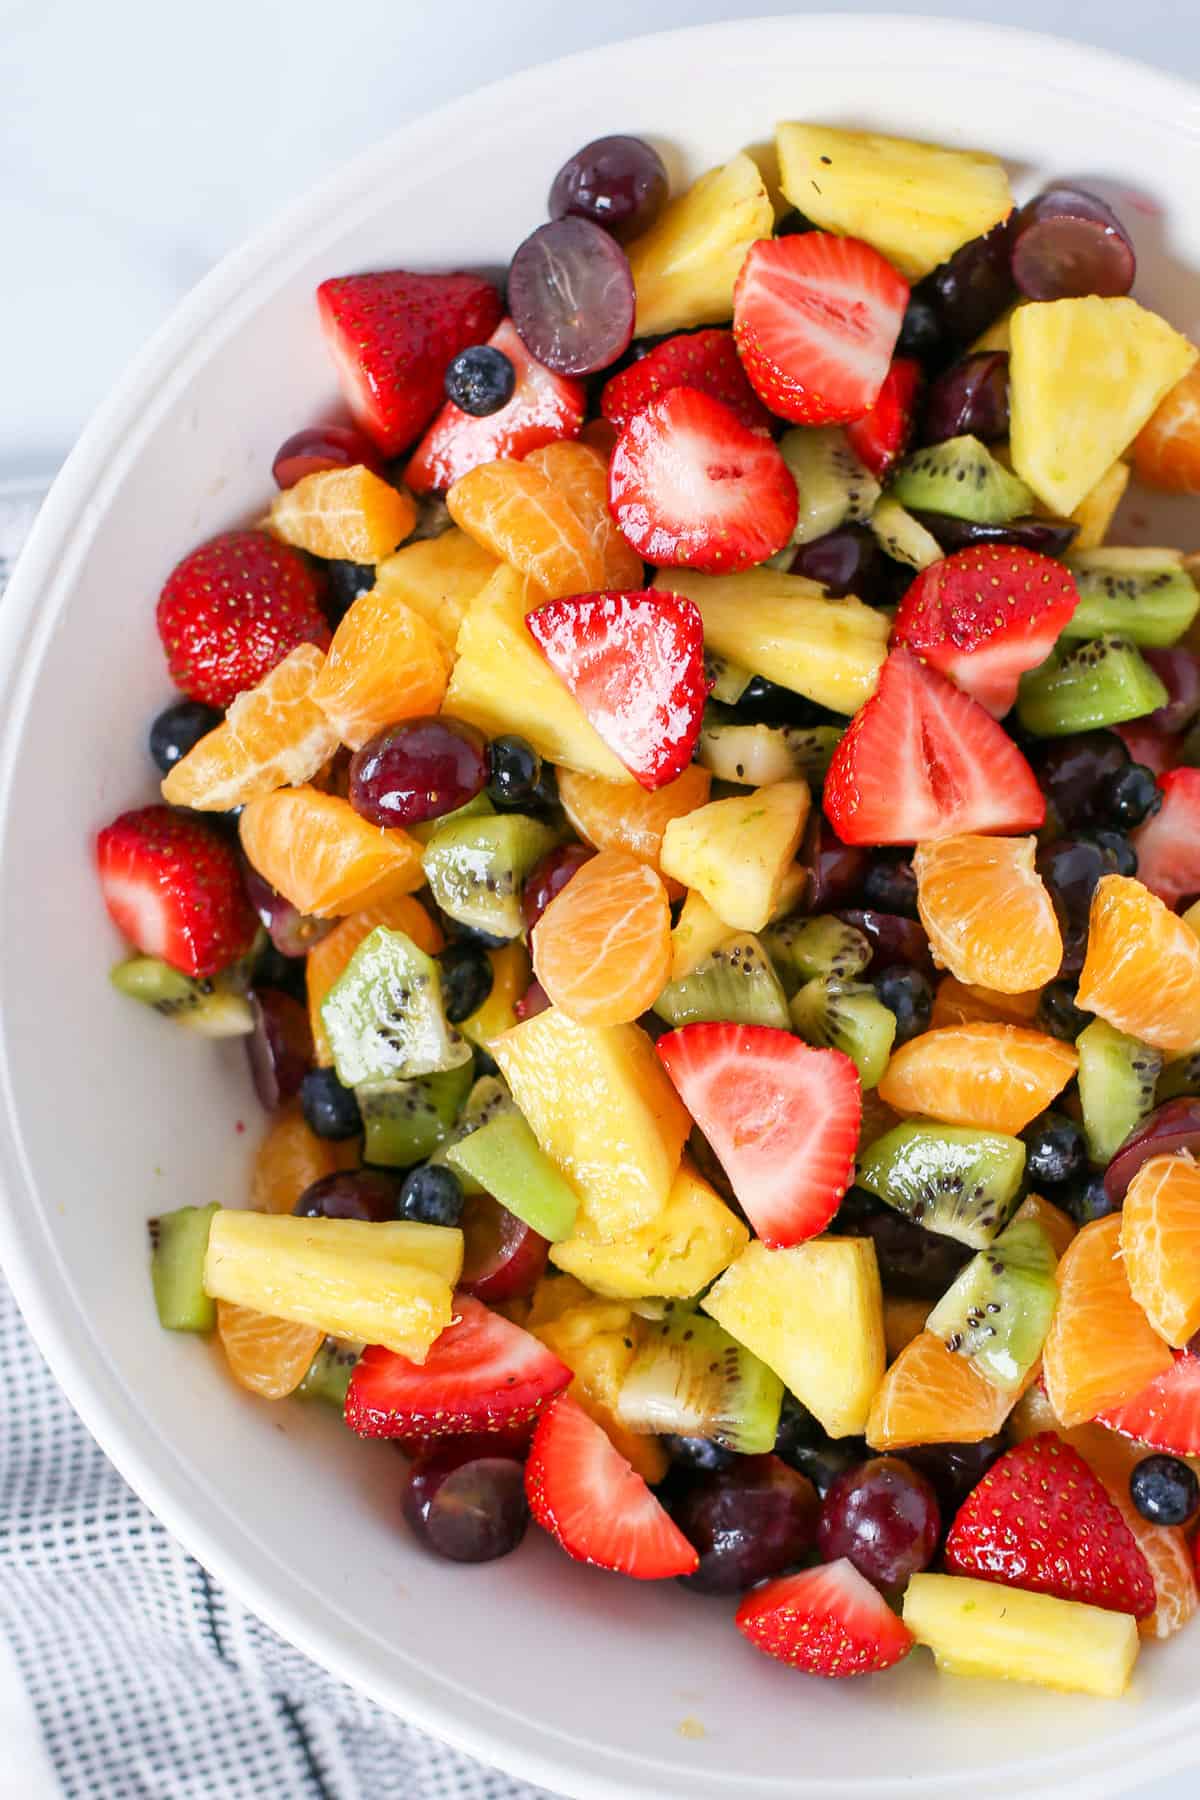 Fruit salad consisting of strawberries, clementines. grapes, kiwi, pineapple, and blueberries.